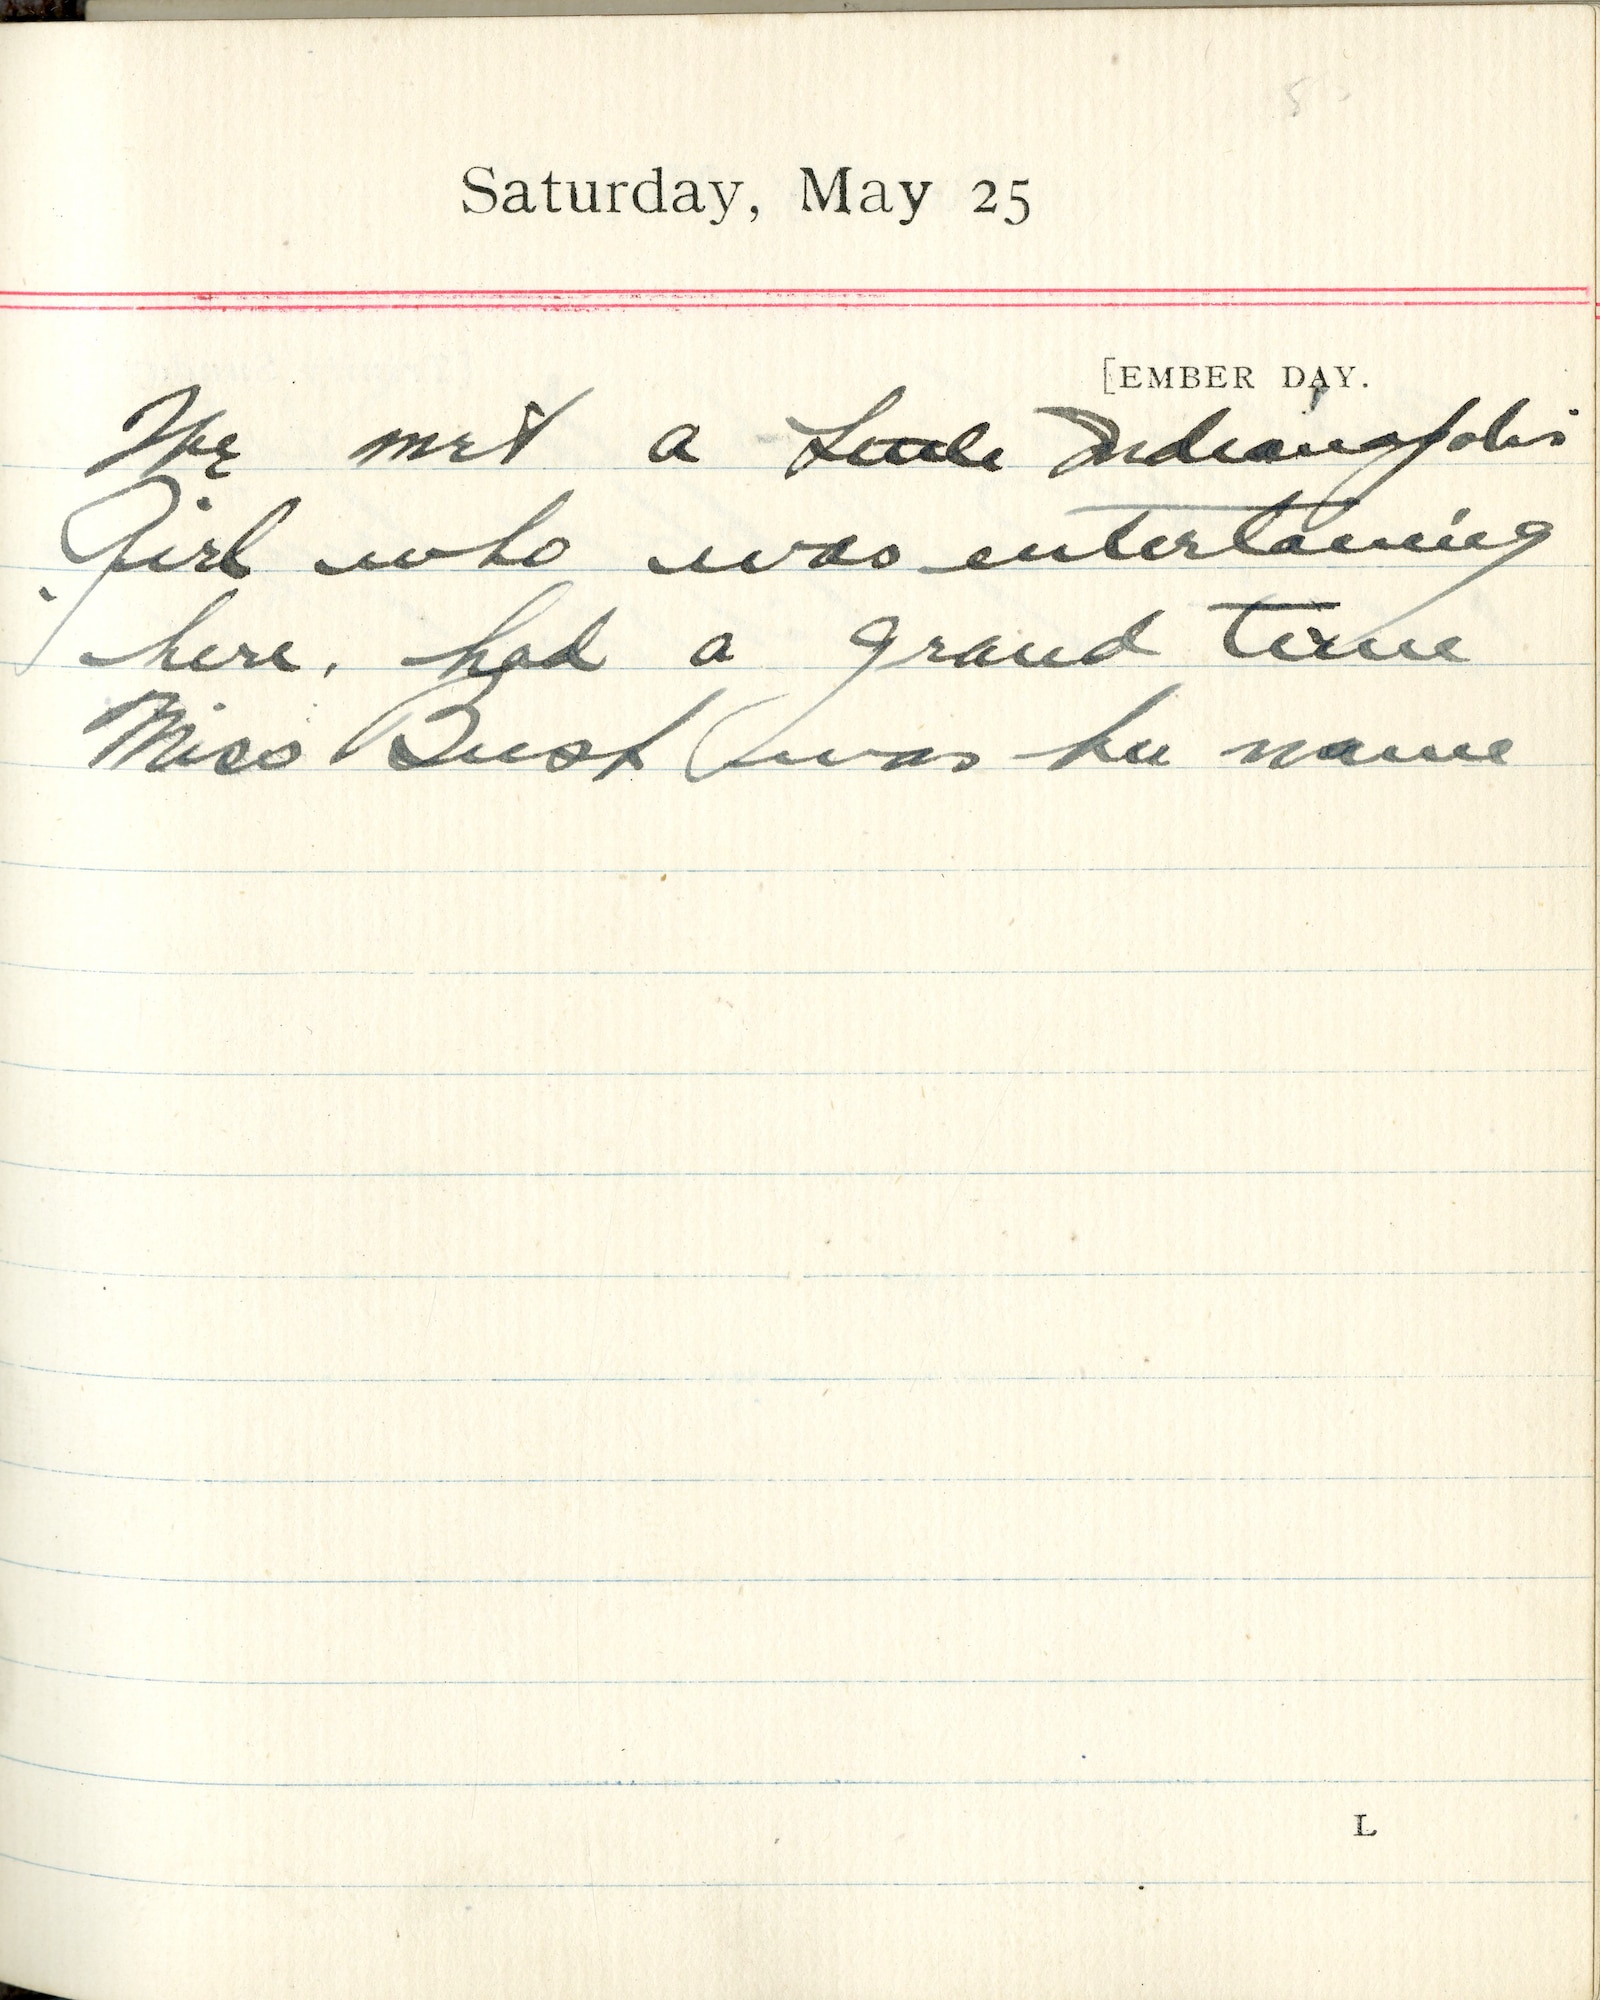 Capt. Edward V. Rickenbacker's 1918 wartime diary entry. (05/25/1918)

We met a little Indianapolis girl who was entertaining here.  Had a grand time.  Miss [Ruth] Bush was her name.